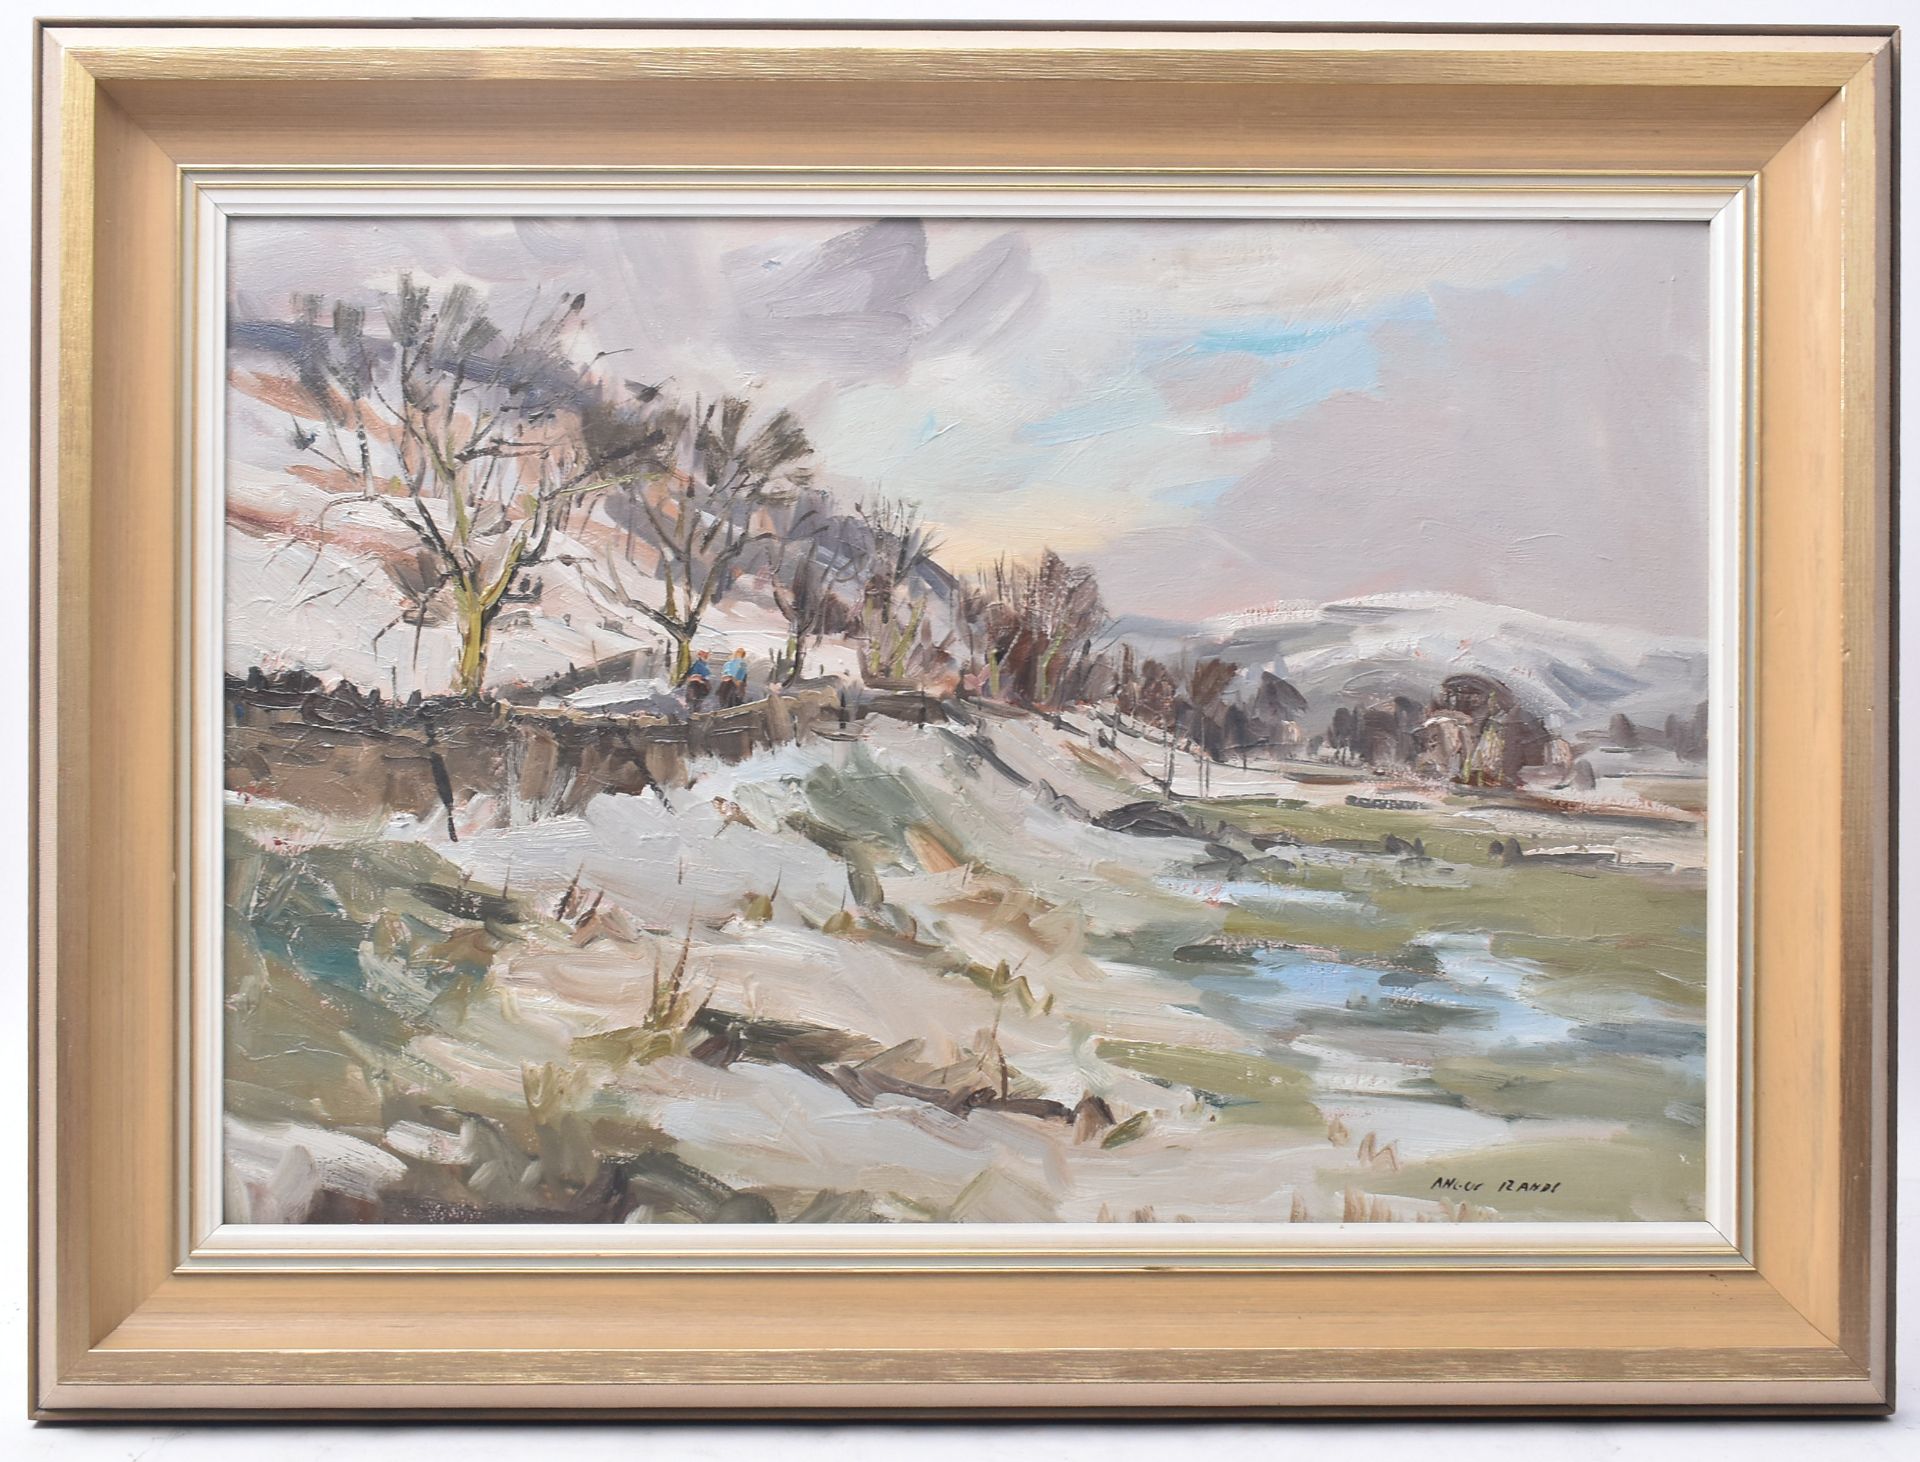 ANGUS RANDS - TOWARDS KETTLEWELL - OIL ON BOARD PAINTING - Image 2 of 5